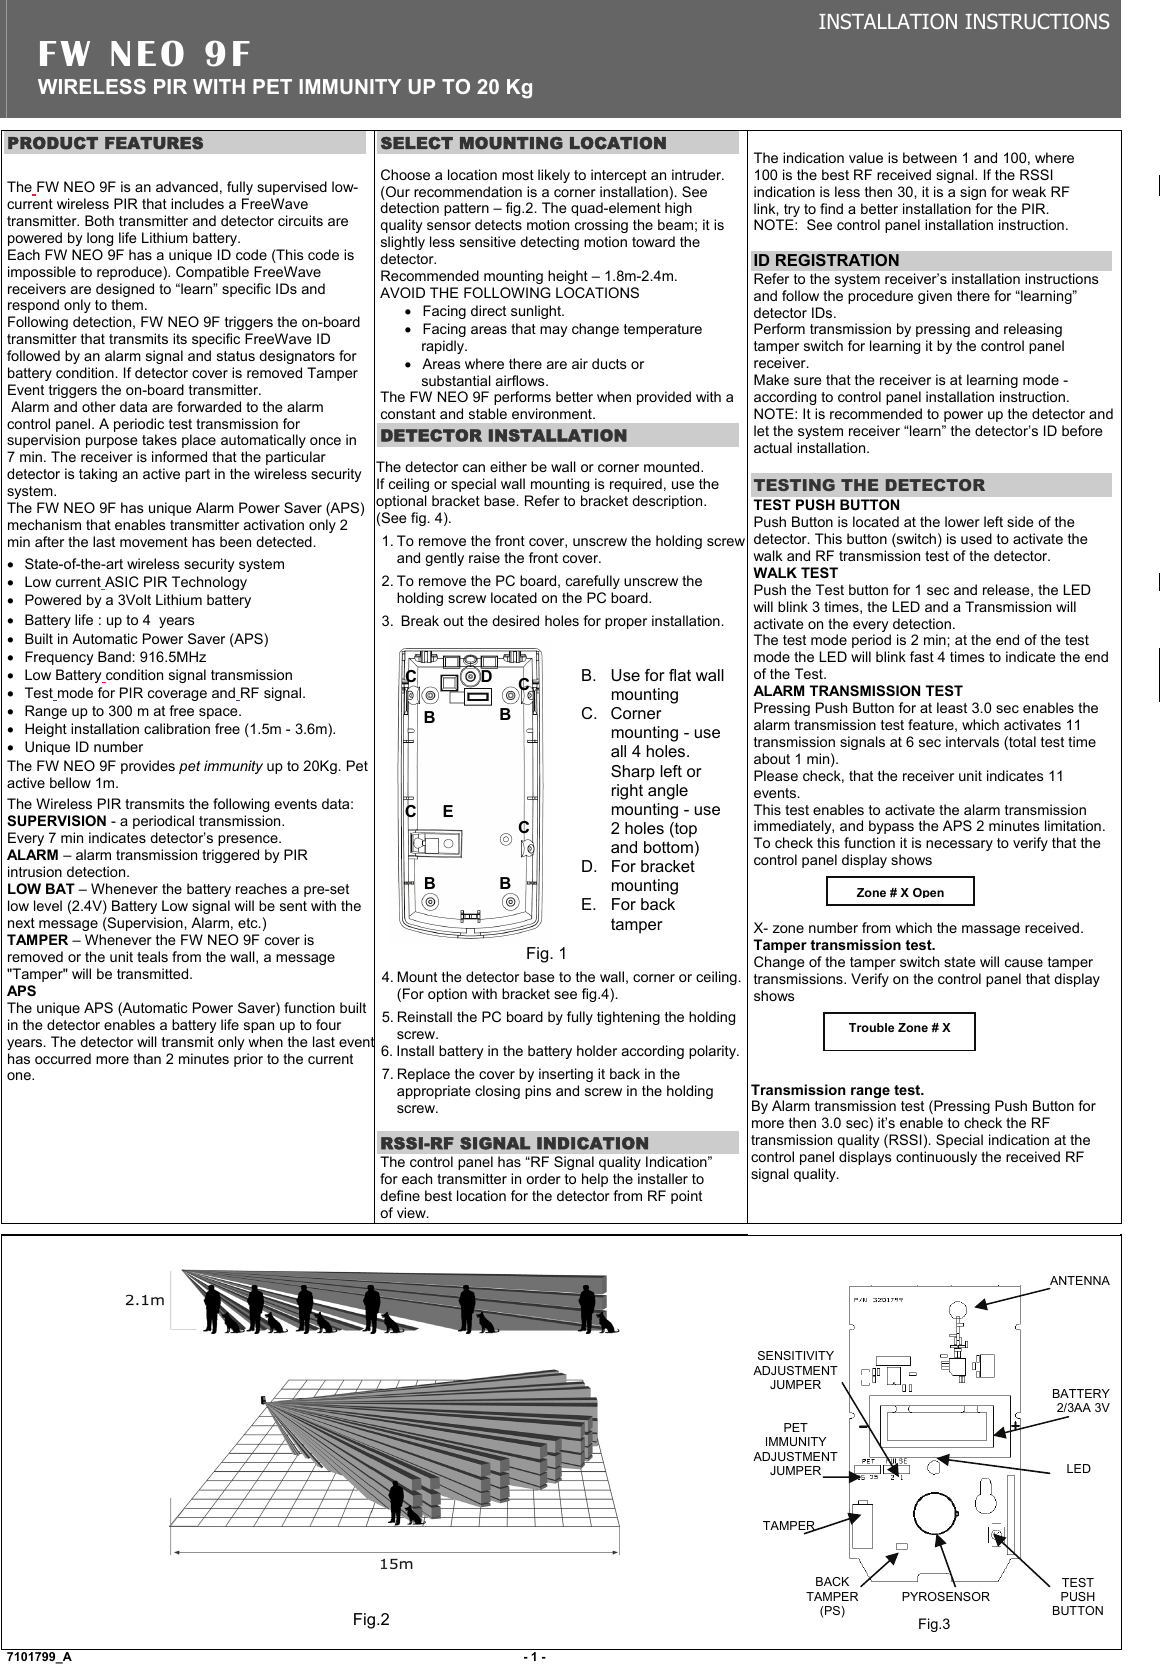 INSTALLATION INSTRUCTIONS FW NEO 9F  WIRELESS PIR WITH PET IMMUNITY UP TO 20 Kg PRODUCT FEATURES  The FW NEO 9F is an advanced, fully supervised low-current wireless PIR that includes a FreeWave transmitter. Both transmitter and detector circuits are powered by long life Lithium battery. Each FW NEO 9F has a unique ID code (This code is impossible to reproduce). Compatible FreeWave receivers are designed to “learn” specific IDs and respond only to them. Following detection, FW NEO 9F triggers the on-board transmitter that transmits its specific FreeWave ID followed by an alarm signal and status designators for battery condition. If detector cover is removed Tamper Event triggers the on-board transmitter.  Alarm and other data are forwarded to the alarm control panel. A periodic test transmission for supervision purpose takes place automatically once in 7 min. The receiver is informed that the particular detector is taking an active part in the wireless security system. The FW NEO 9F has unique Alarm Power Saver (APS) mechanism that enables transmitter activation only 2 min after the last movement has been detected. • State-of-the-art wireless security system • Low current ASIC PIR Technology •  Powered by a 3Volt Lithium battery •  Battery life : up to 4  years •  Built in Automatic Power Saver (APS) •  Frequency Band: 916.5MHz  • Low Battery condition signal transmission • Test mode for PIR coverage and RF signal. •  Range up to 300 m at free space. •  Height installation calibration free (1.5m - 3.6m).  •  Unique ID number The FW NEO 9F provides pet immunity up to 20Kg. Pet active bellow 1m. The Wireless PIR transmits the following events data: SUPERVISION - a periodical transmission. Every 7 min indicates detector’s presence. ALARM – alarm transmission triggered by PIR intrusion detection.  LOW BAT – Whenever the battery reaches a pre-set low level (2.4V) Battery Low signal will be sent with the next message (Supervision, Alarm, etc.) TAMPER – Whenever the FW NEO 9F cover is removed or the unit teals from the wall, a message &quot;Tamper&quot; will be transmitted. APS  The unique APS (Automatic Power Saver) function built in the detector enables a battery life span up to four years. The detector will transmit only when the last eventhas occurred more than 2 minutes prior to the current one.     SELECT MOUNTING LOCATION Choose a location most likely to intercept an intruder. (Our recommendation is a corner installation). See detection pattern – fig.2. The quad-element high quality sensor detects motion crossing the beam; it is slightly less sensitive detecting motion toward the detector. Recommended mounting height – 1.8m-2.4m. AVOID THE FOLLOWING LOCATIONS •  Facing direct sunlight. •  Facing areas that may change temperature rapidly. •  Areas where there are air ducts or substantial airflows. The FW NEO 9F performs better when provided with a constant and stable environment.  DETECTOR INSTALLATION The detector can either be wall or corner mounted.   If ceiling or special wall mounting is required, use the optional bracket base. Refer to bracket description.   (See fig. 4). 1. To remove the front cover, unscrew the holding screw and gently raise the front cover. 2. To remove the PC board, carefully unscrew the holding screw located on the PC board. 3.  Break out the desired holes for proper installation.   Fig. 1 4. Mount the detector base to the wall, corner or ceiling. (For option with bracket see fig.4). 5. Reinstall the PC board by fully tightening the holding screw.  6. Install battery in the battery holder according polarity.7. Replace the cover by inserting it back in the appropriate closing pins and screw in the holding screw.  RSSI-RF SIGNAL INDICATION The control panel has “RF Signal quality Indication” for each transmitter in order to help the installer to define best location for the detector from RF point of view.  The indication value is between 1 and 100, where 100 is the best RF received signal. If the RSSI indication is less then 30, it is a sign for weak RF link, try to find a better installation for the PIR.  NOTE:  See control panel installation instruction.  ID REGISTRATION Refer to the system receiver’s installation instructions and follow the procedure given there for “learning” detector IDs.  Perform transmission by pressing and releasing tamper switch for learning it by the control panel receiver.  Make sure that the receiver is at learning mode - according to control panel installation instruction. NOTE: It is recommended to power up the detector and let the system receiver “learn” the detector’s ID before actual installation.  TESTING THE DETECTOR TEST PUSH BUTTON   Push Button is located at the lower left side of the detector. This button (switch) is used to activate the walk and RF transmission test of the detector. WALK TEST Push the Test button for 1 sec and release, the LED will blink 3 times, the LED and a Transmission will activate on the every detection. The test mode period is 2 min; at the end of the test mode the LED will blink fast 4 times to indicate the end of the Test. ALARM TRANSMISSION TEST Pressing Push Button for at least 3.0 sec enables the alarm transmission test feature, which activates 11 transmission signals at 6 sec intervals (total test time about 1 min).  Please check, that the receiver unit indicates 11 events.  This test enables to activate the alarm transmission immediately, and bypass the APS 2 minutes limitation.  To check this function it is necessary to verify that the control panel display shows     X- zone number from which the massage received.  Tamper transmission test. Change of the tamper switch state will cause tamper transmissions. Verify on the control panel that display shows     Transmission range test. By Alarm transmission test (Pressing Push Button for more then 3.0 sec) it’s enable to check the RF transmission quality (RSSI). Special indication at the control panel displays continuously the received RF signal quality.         Fig.2     Fig.3        7101799_A                                     - 1 -                B.  Use for flat wall mounting C. Corner mounting - use all 4 holes. Sharp left or right angle mounting - use 2 holes (top and bottom) D. For bracket mounting E. For back tamper D B B B B C C C Zone # X OpenTrouble Zone # X  C E ANTENNA BATTERY 2/3AA 3V LED TEST PUSH BUTTONPYROSENSOR PET IMMUNITY ADJUSTMENT JUMPER TAMPERBACK TAMPER (PS) SENSITIVITY ADJUSTMENT JUMPER 